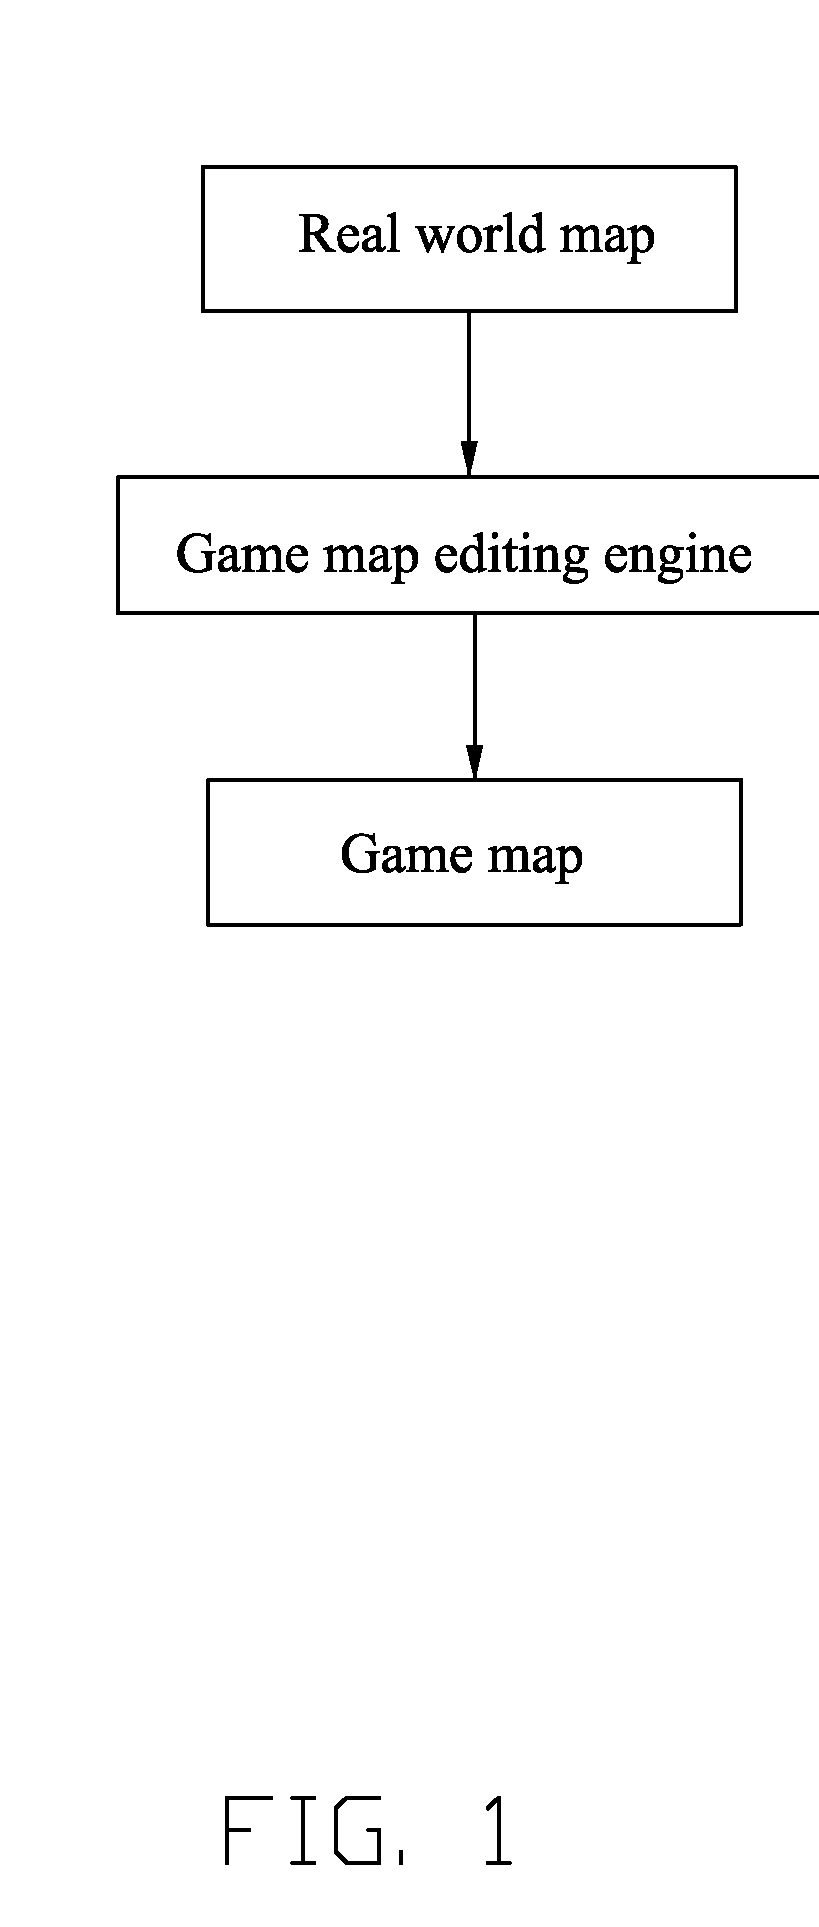 Method for creating game map